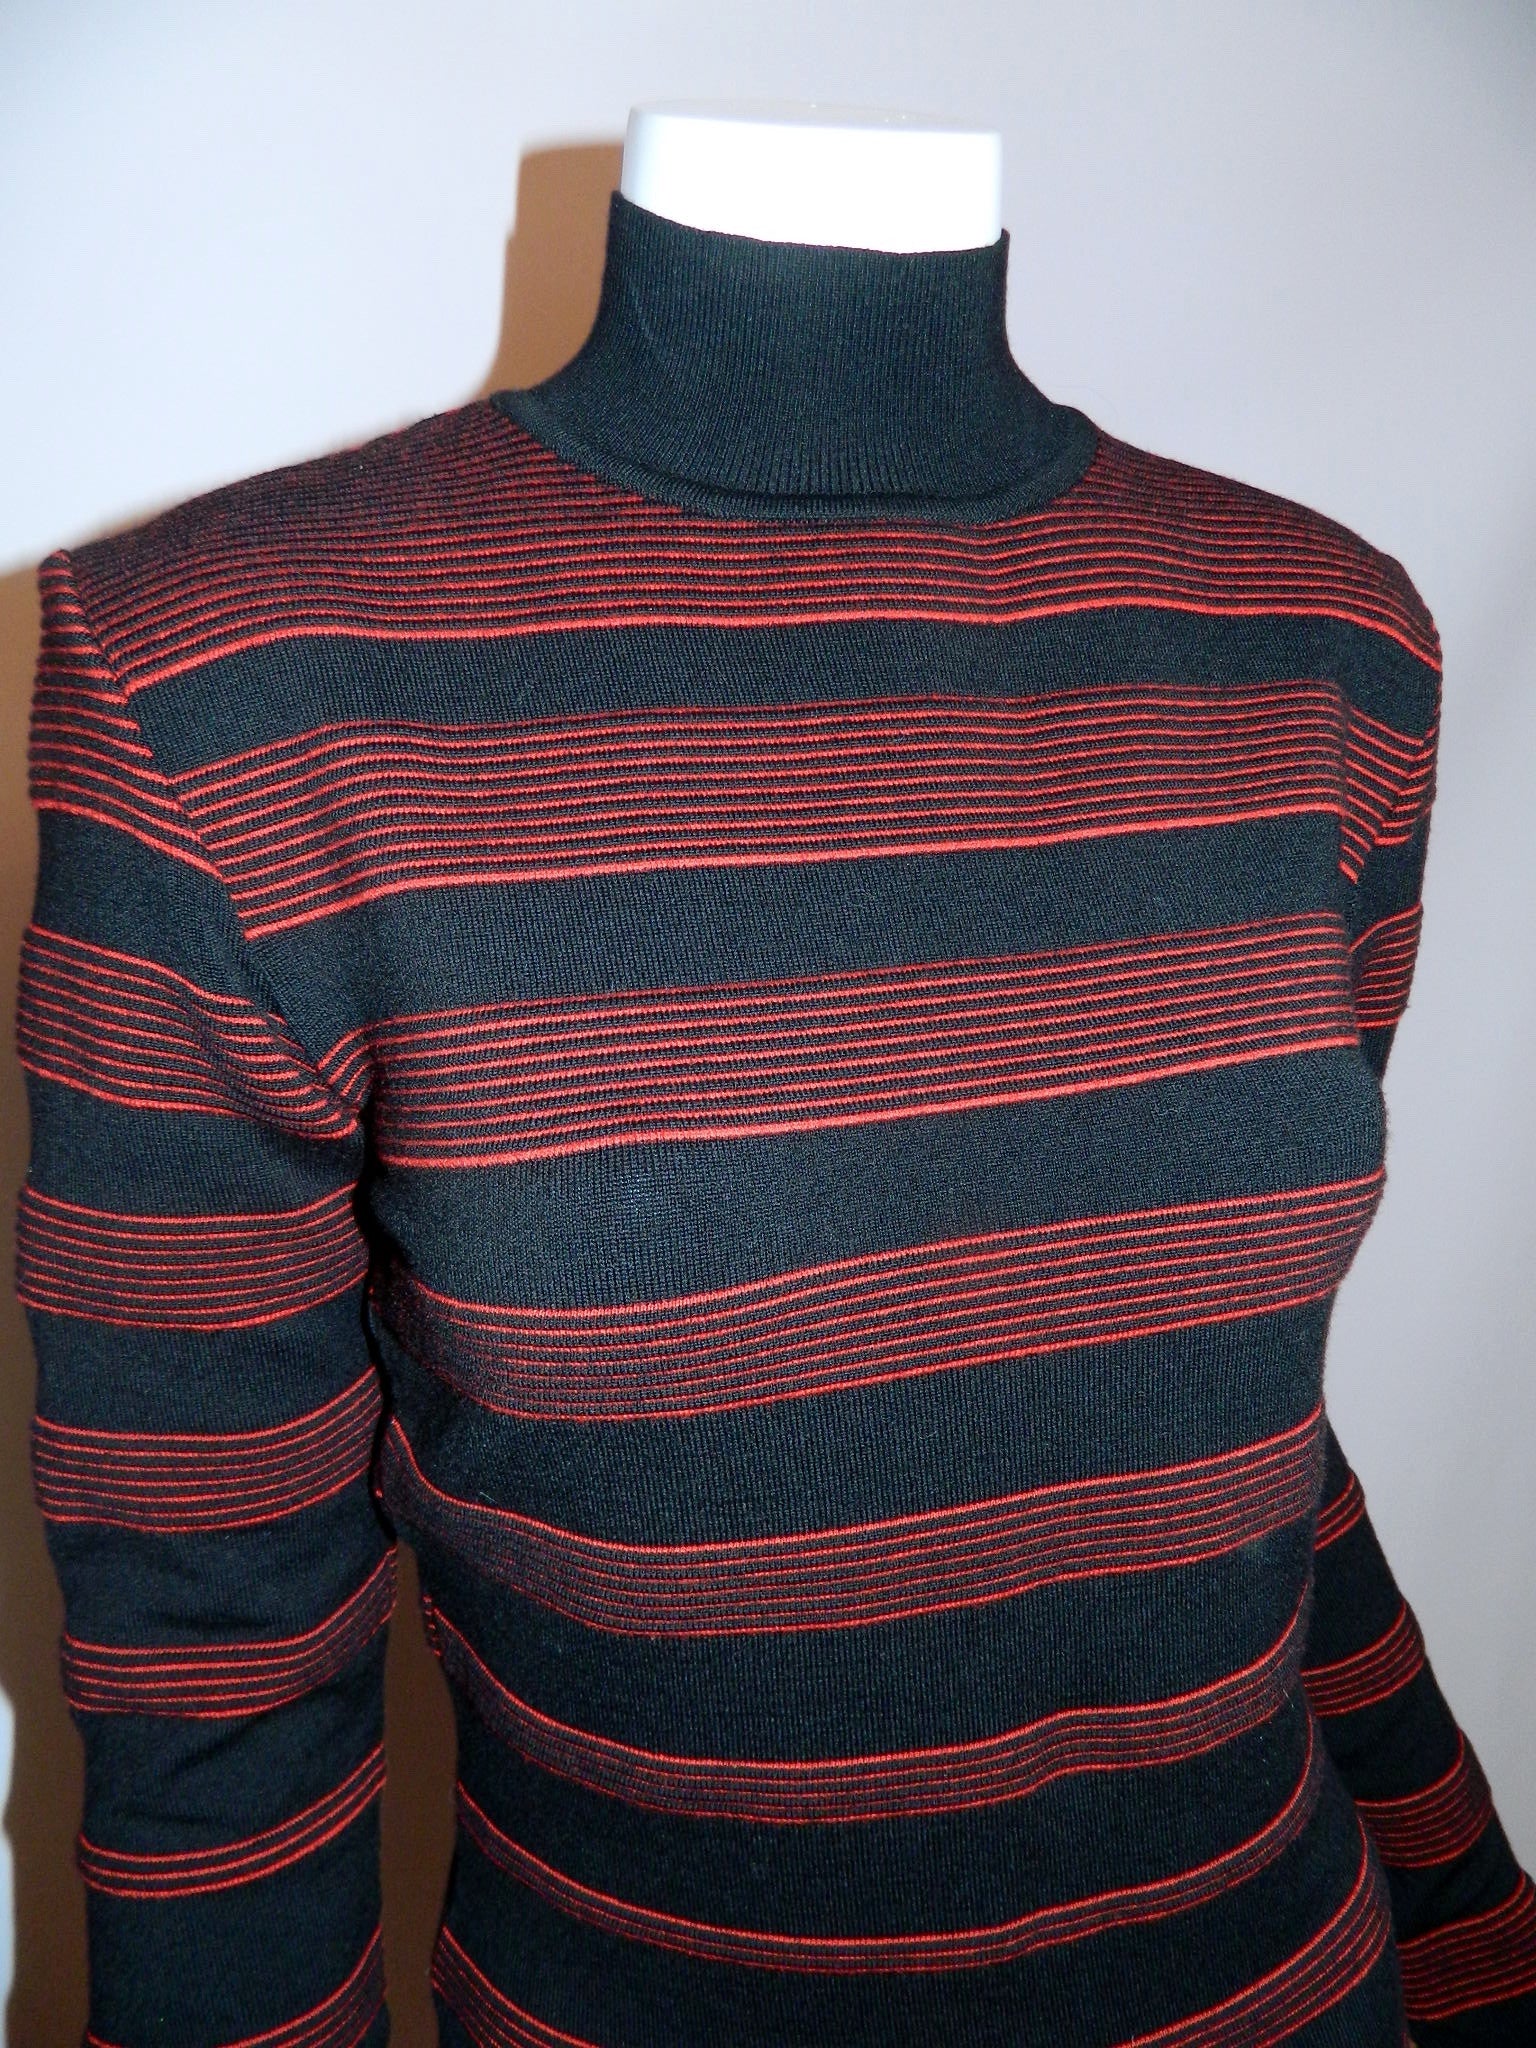 vintage 1980s dress Thierry Mugler by Alaia Bandage wool Body Con knit ...